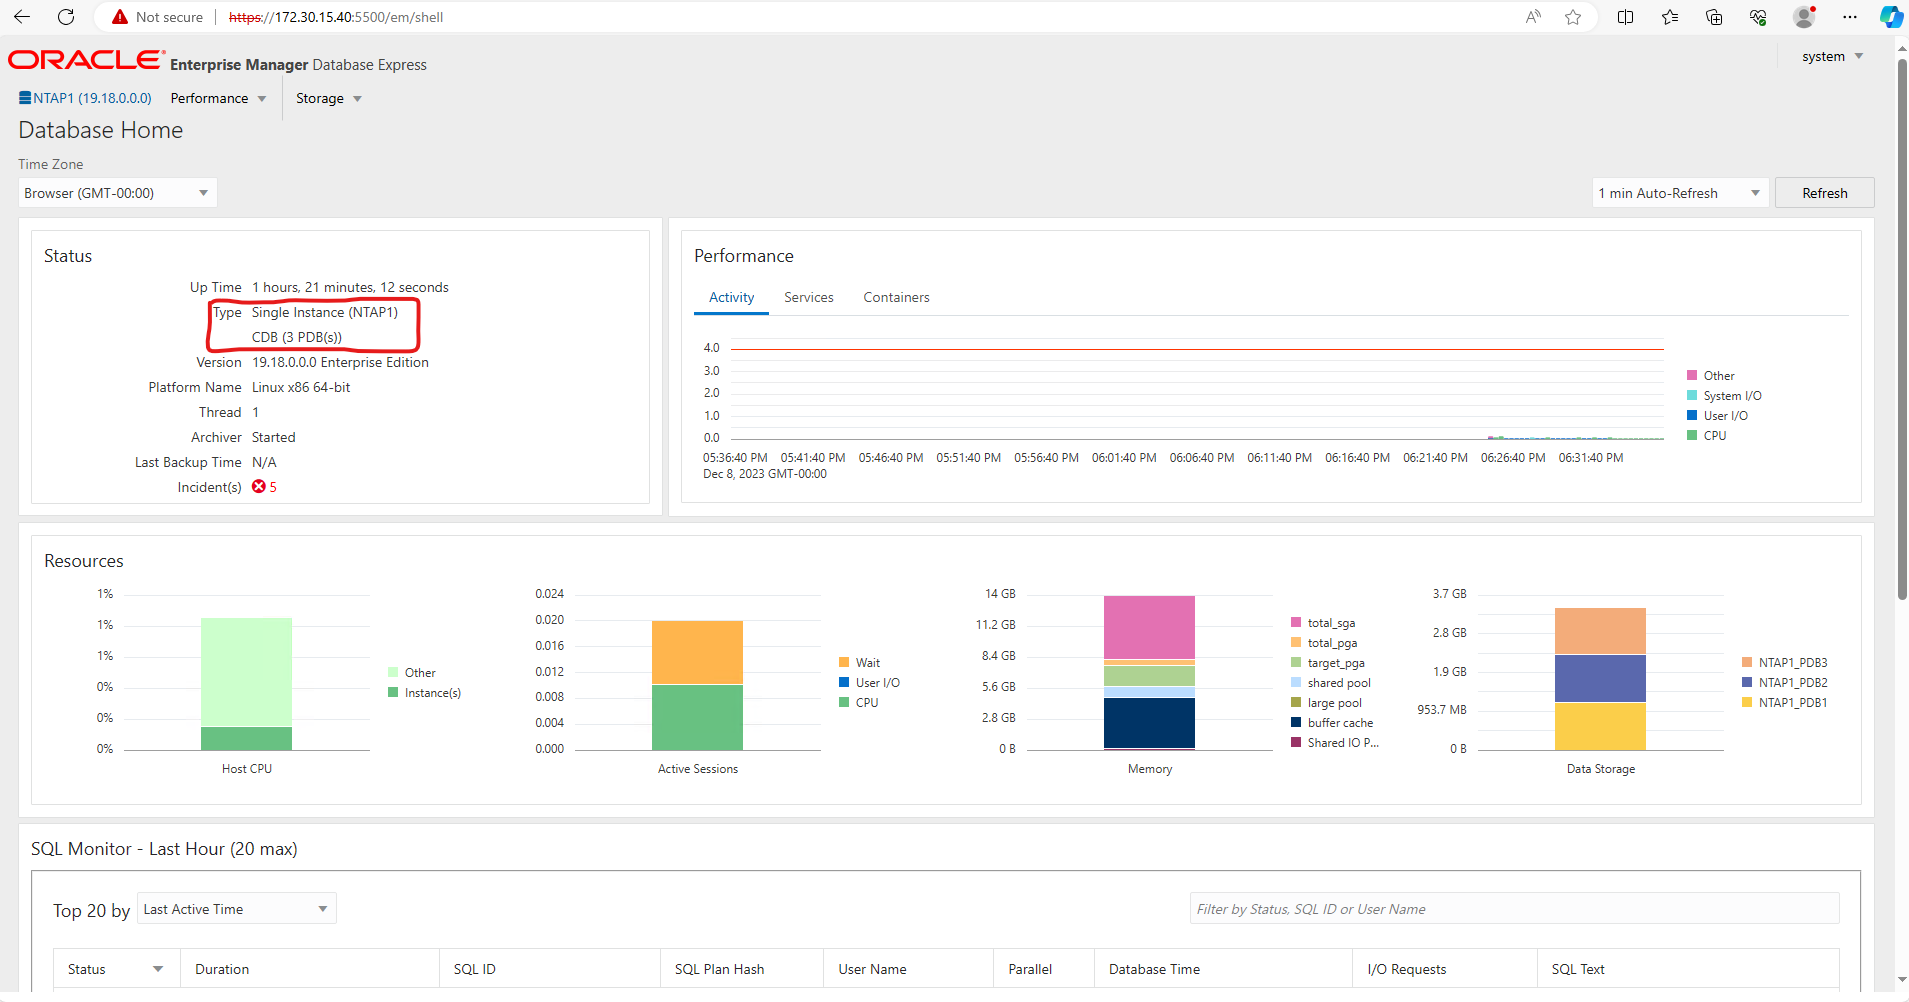 This image provides container database view from Oracle Enterprise Manager Express